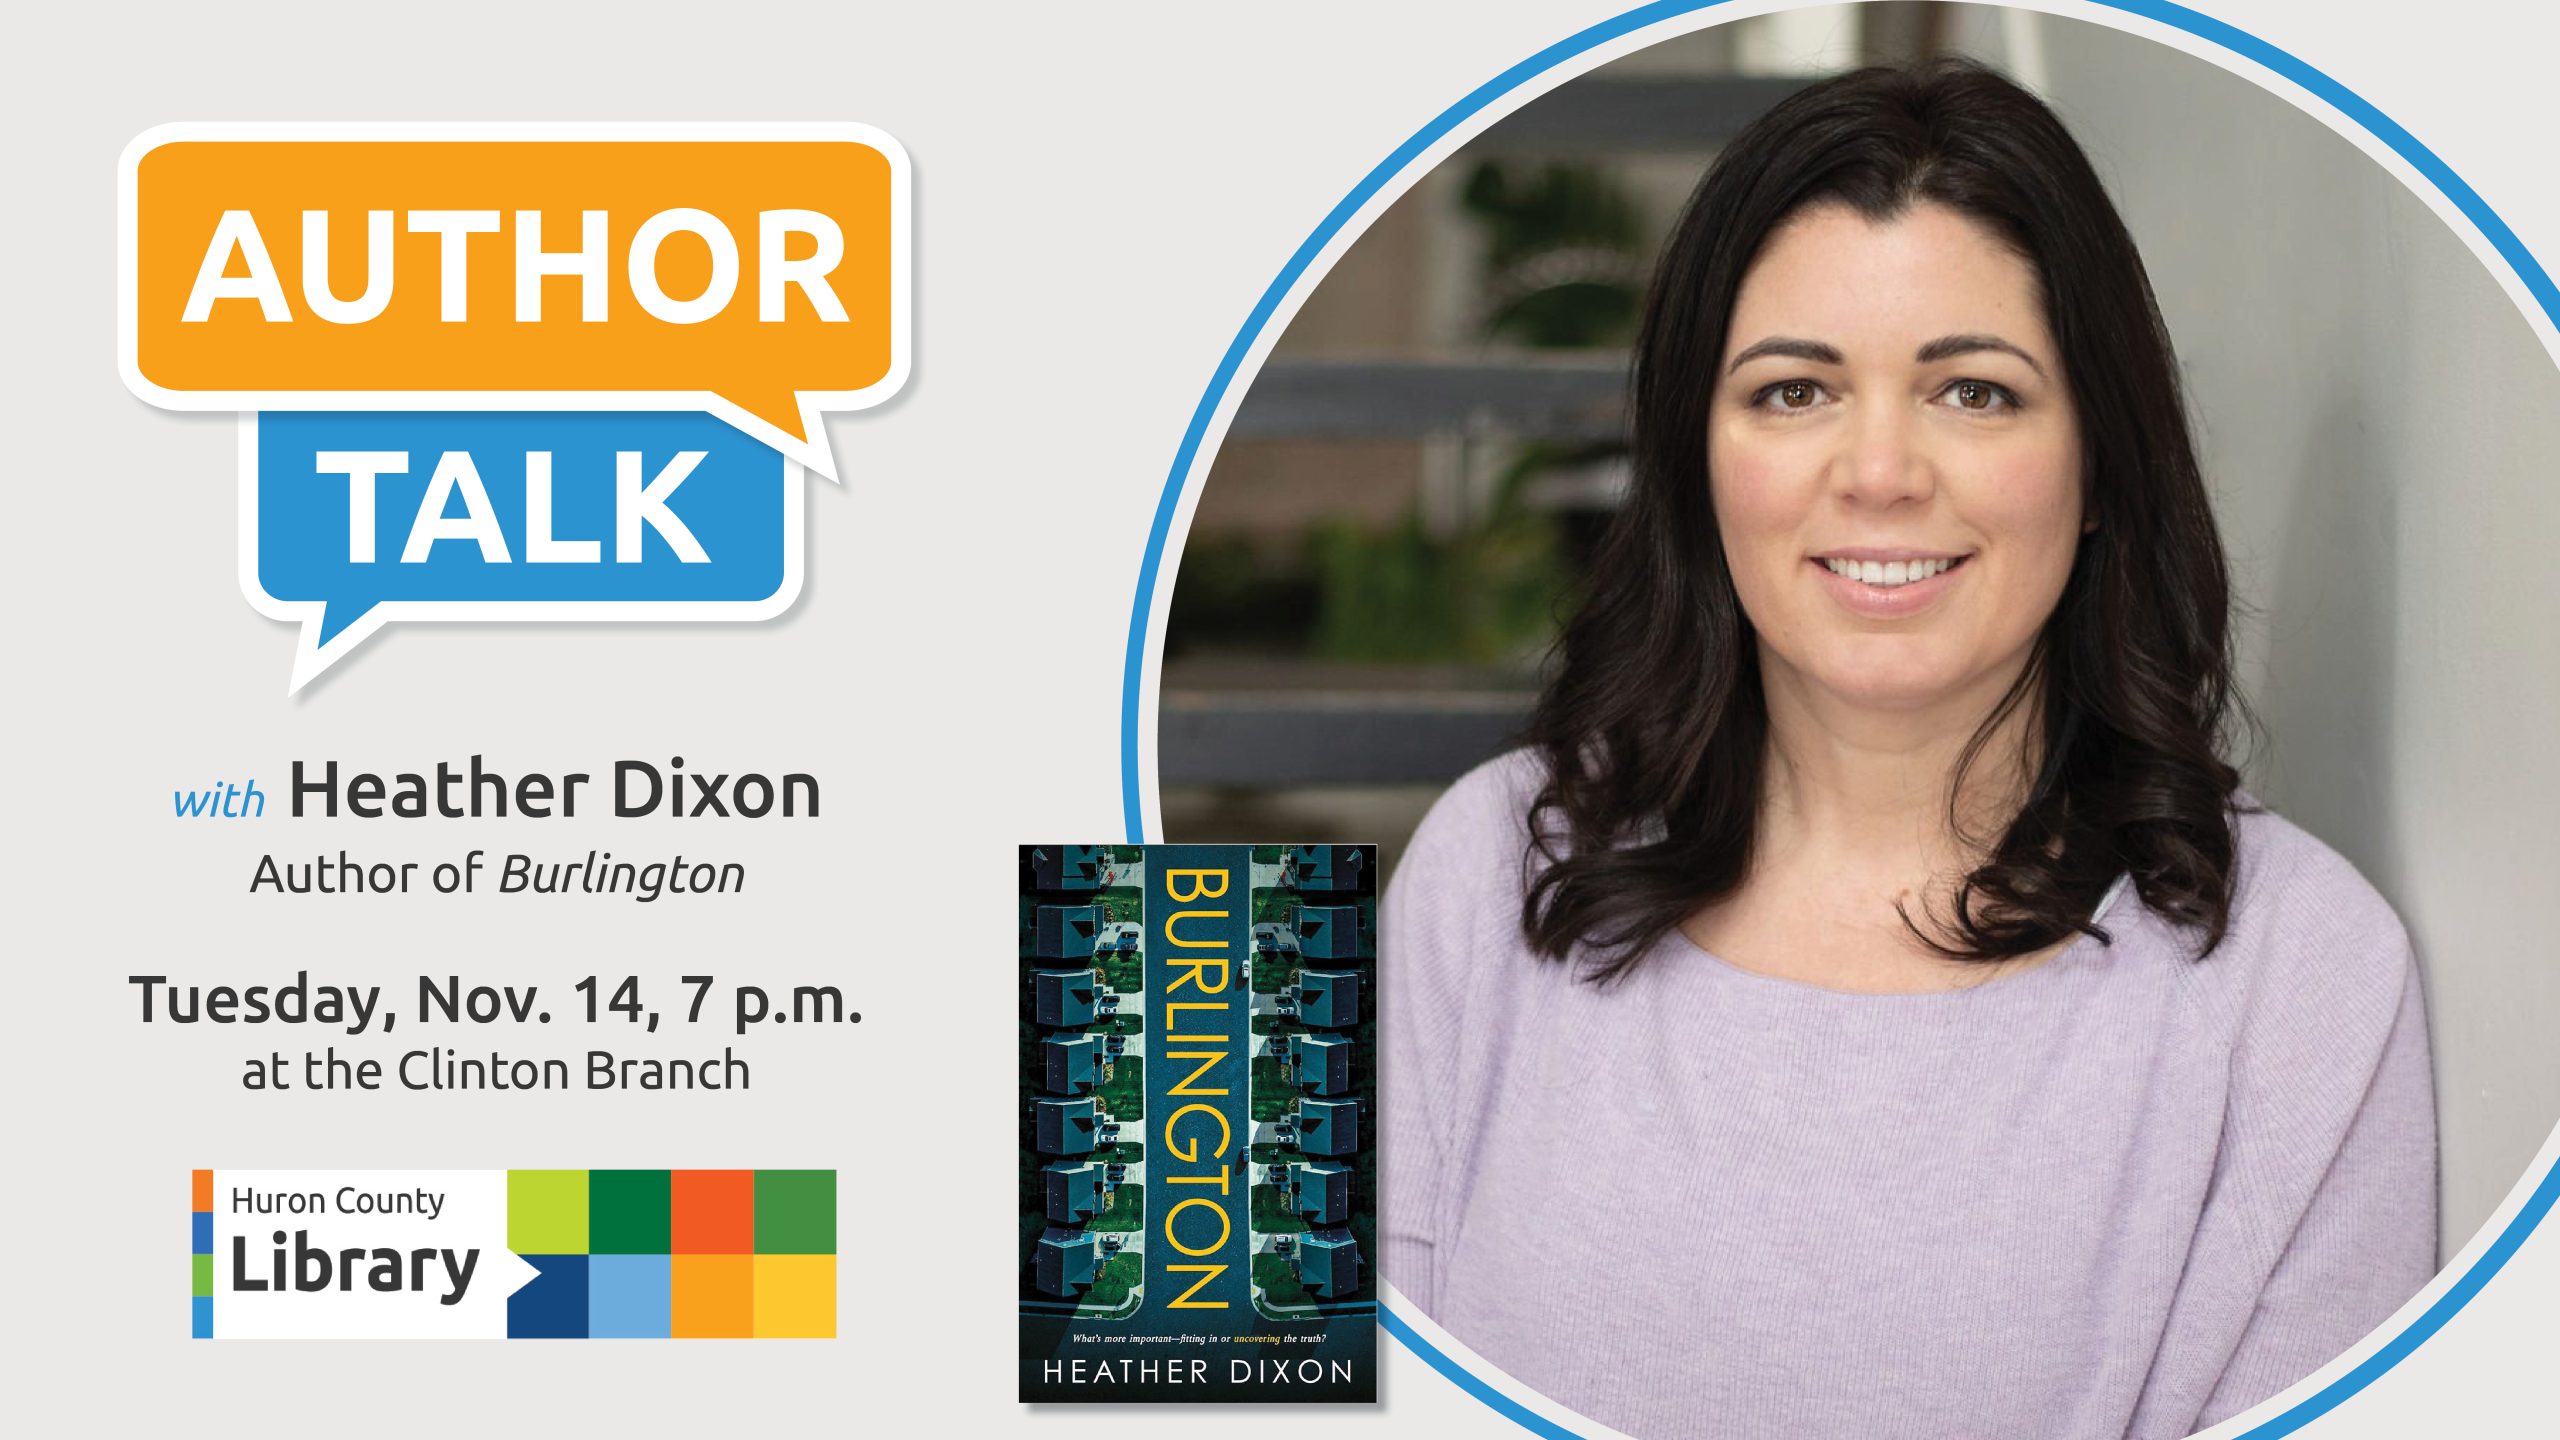 Photo of author Heather Dixon with text promoting her author talk at the Clinton Branch